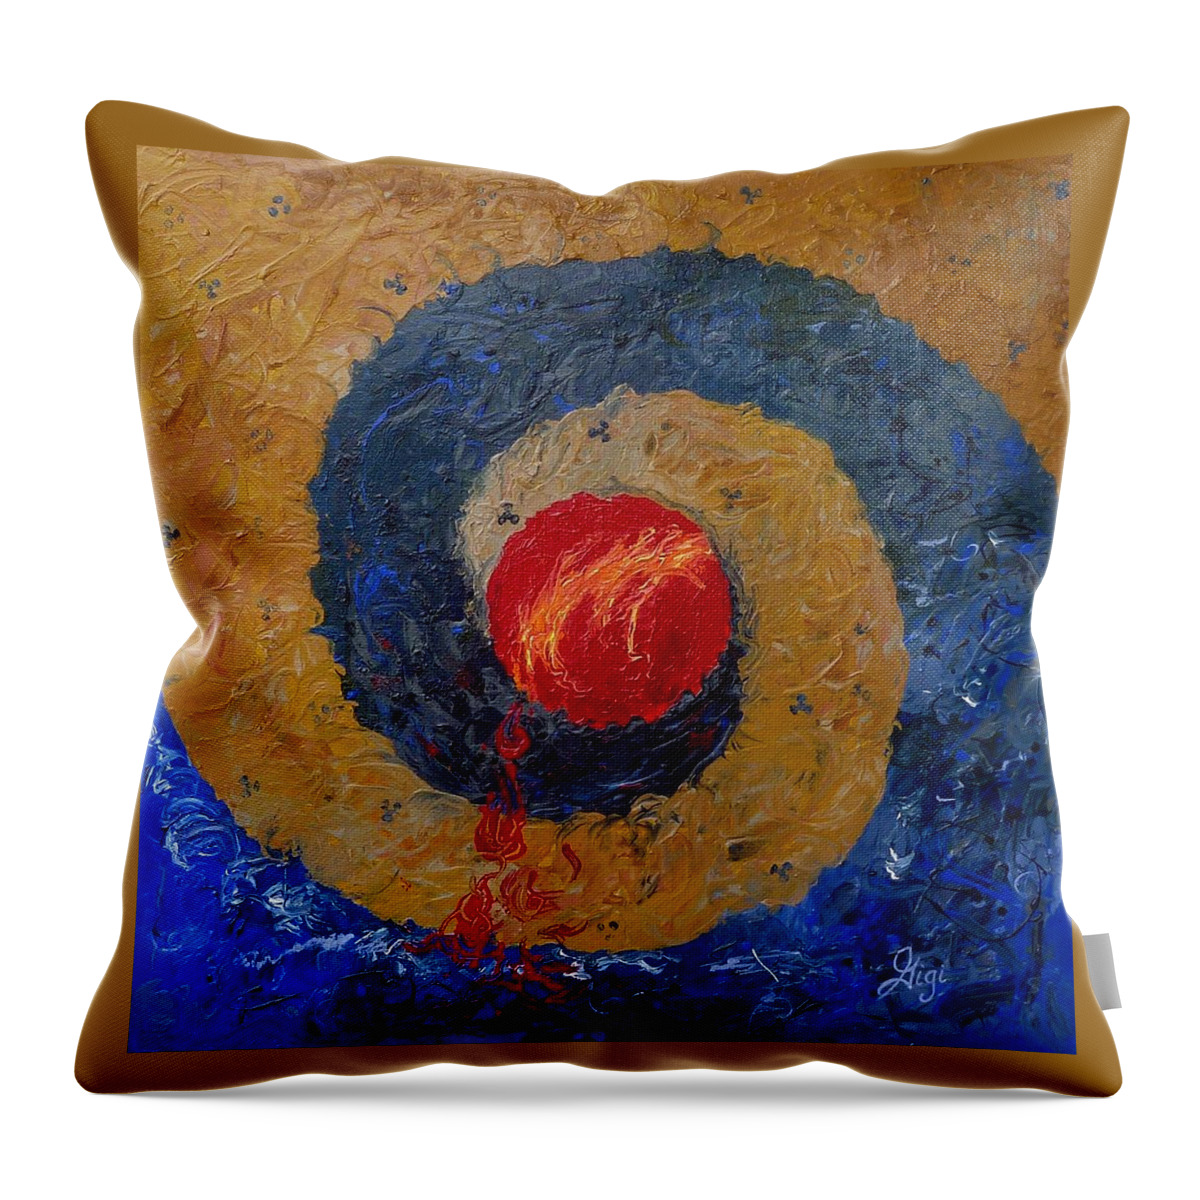 Threefold Throw Pillow featuring the painting Threefold Anguish by Gigi Dequanne